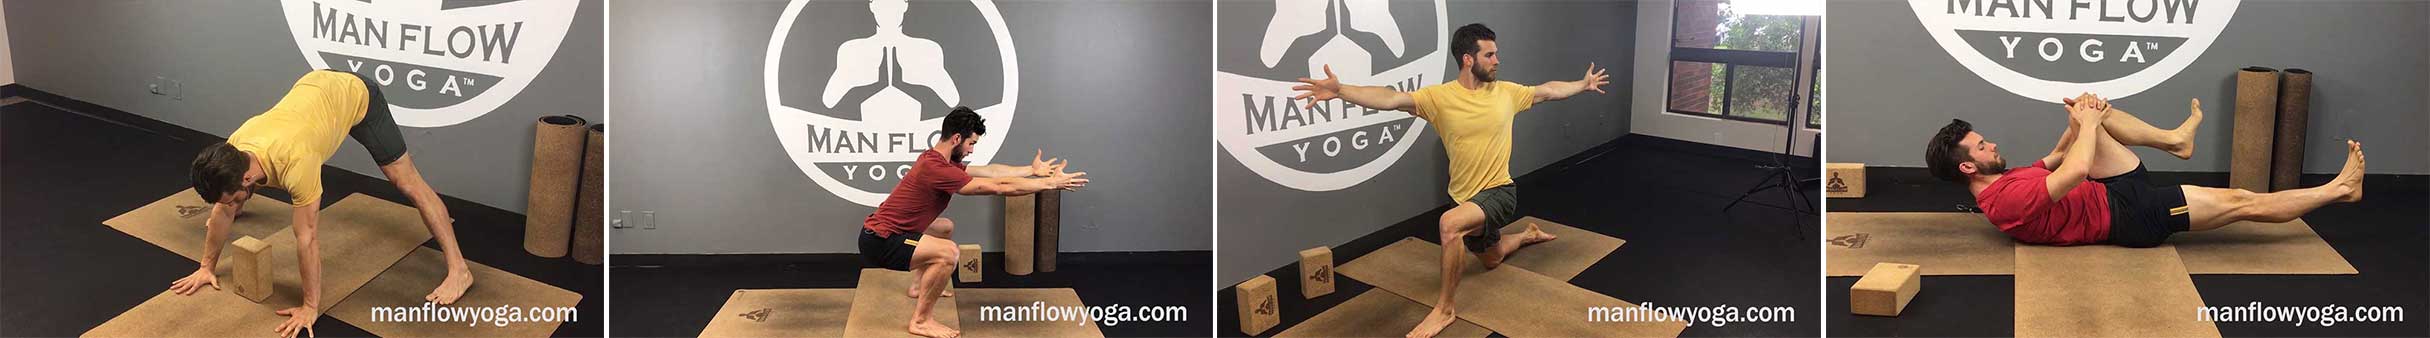 How To Get Rid of Low-Back Pain - How Man Flow Yoga Helps